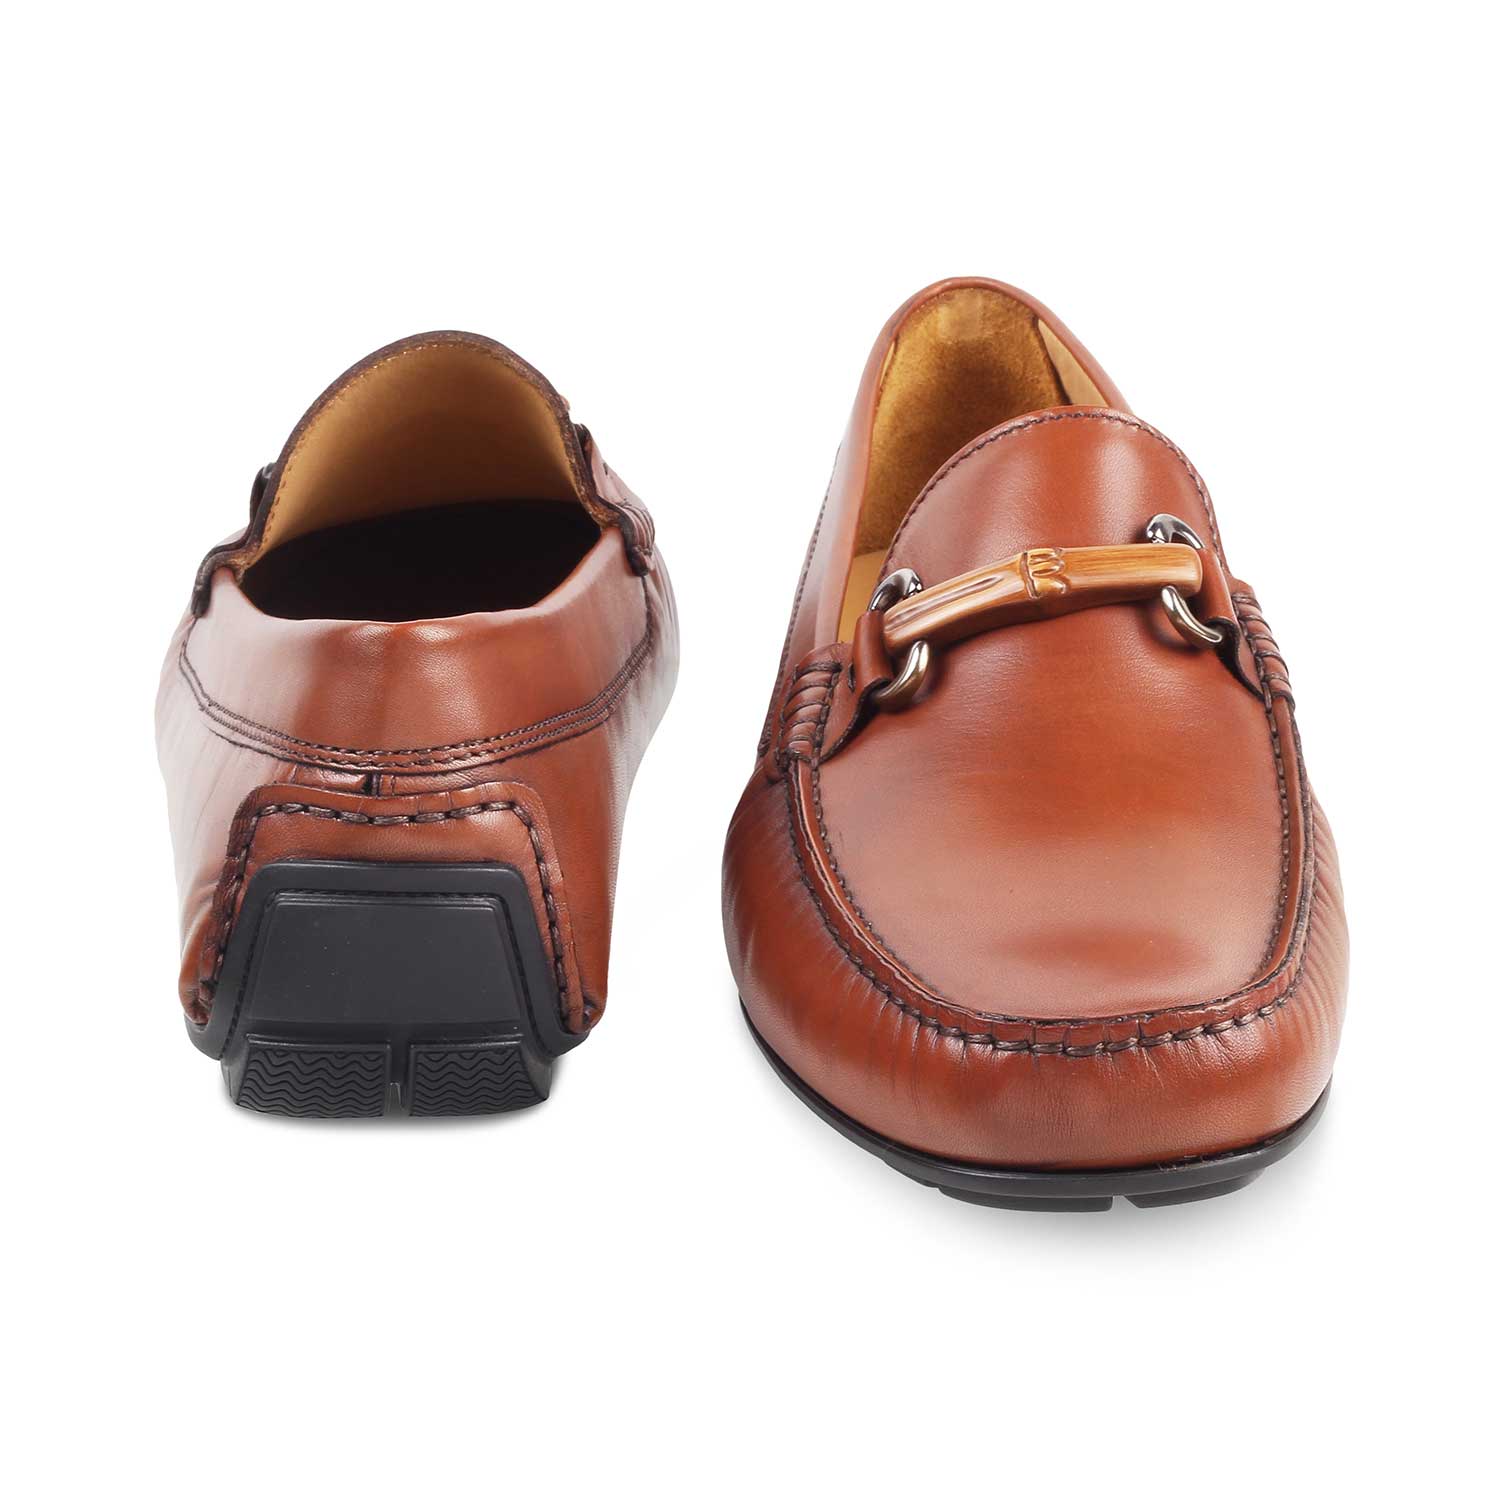 The Prodo Brown Men's Handcrafted Leather Driving Loafers Tresmode - Tresmode